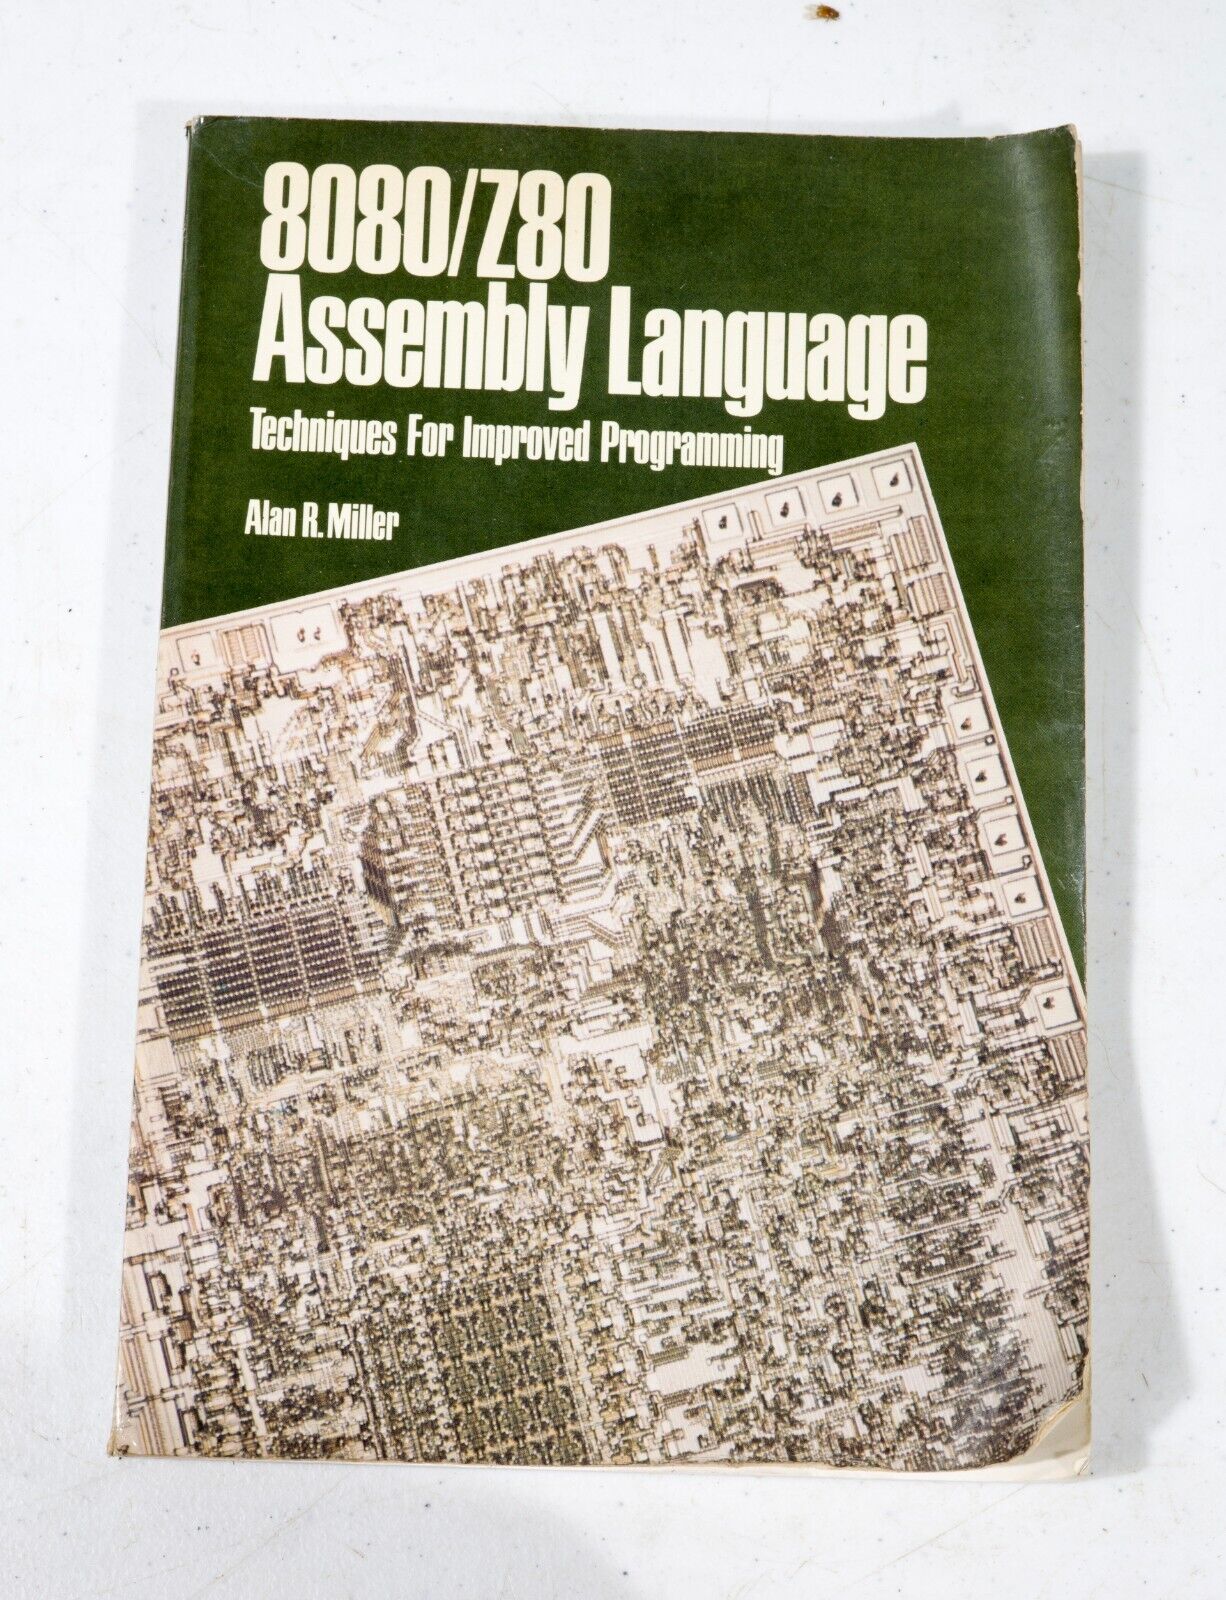 Vintage 8080/Z80 Assembly Language Techniques for Improved Programming ST533